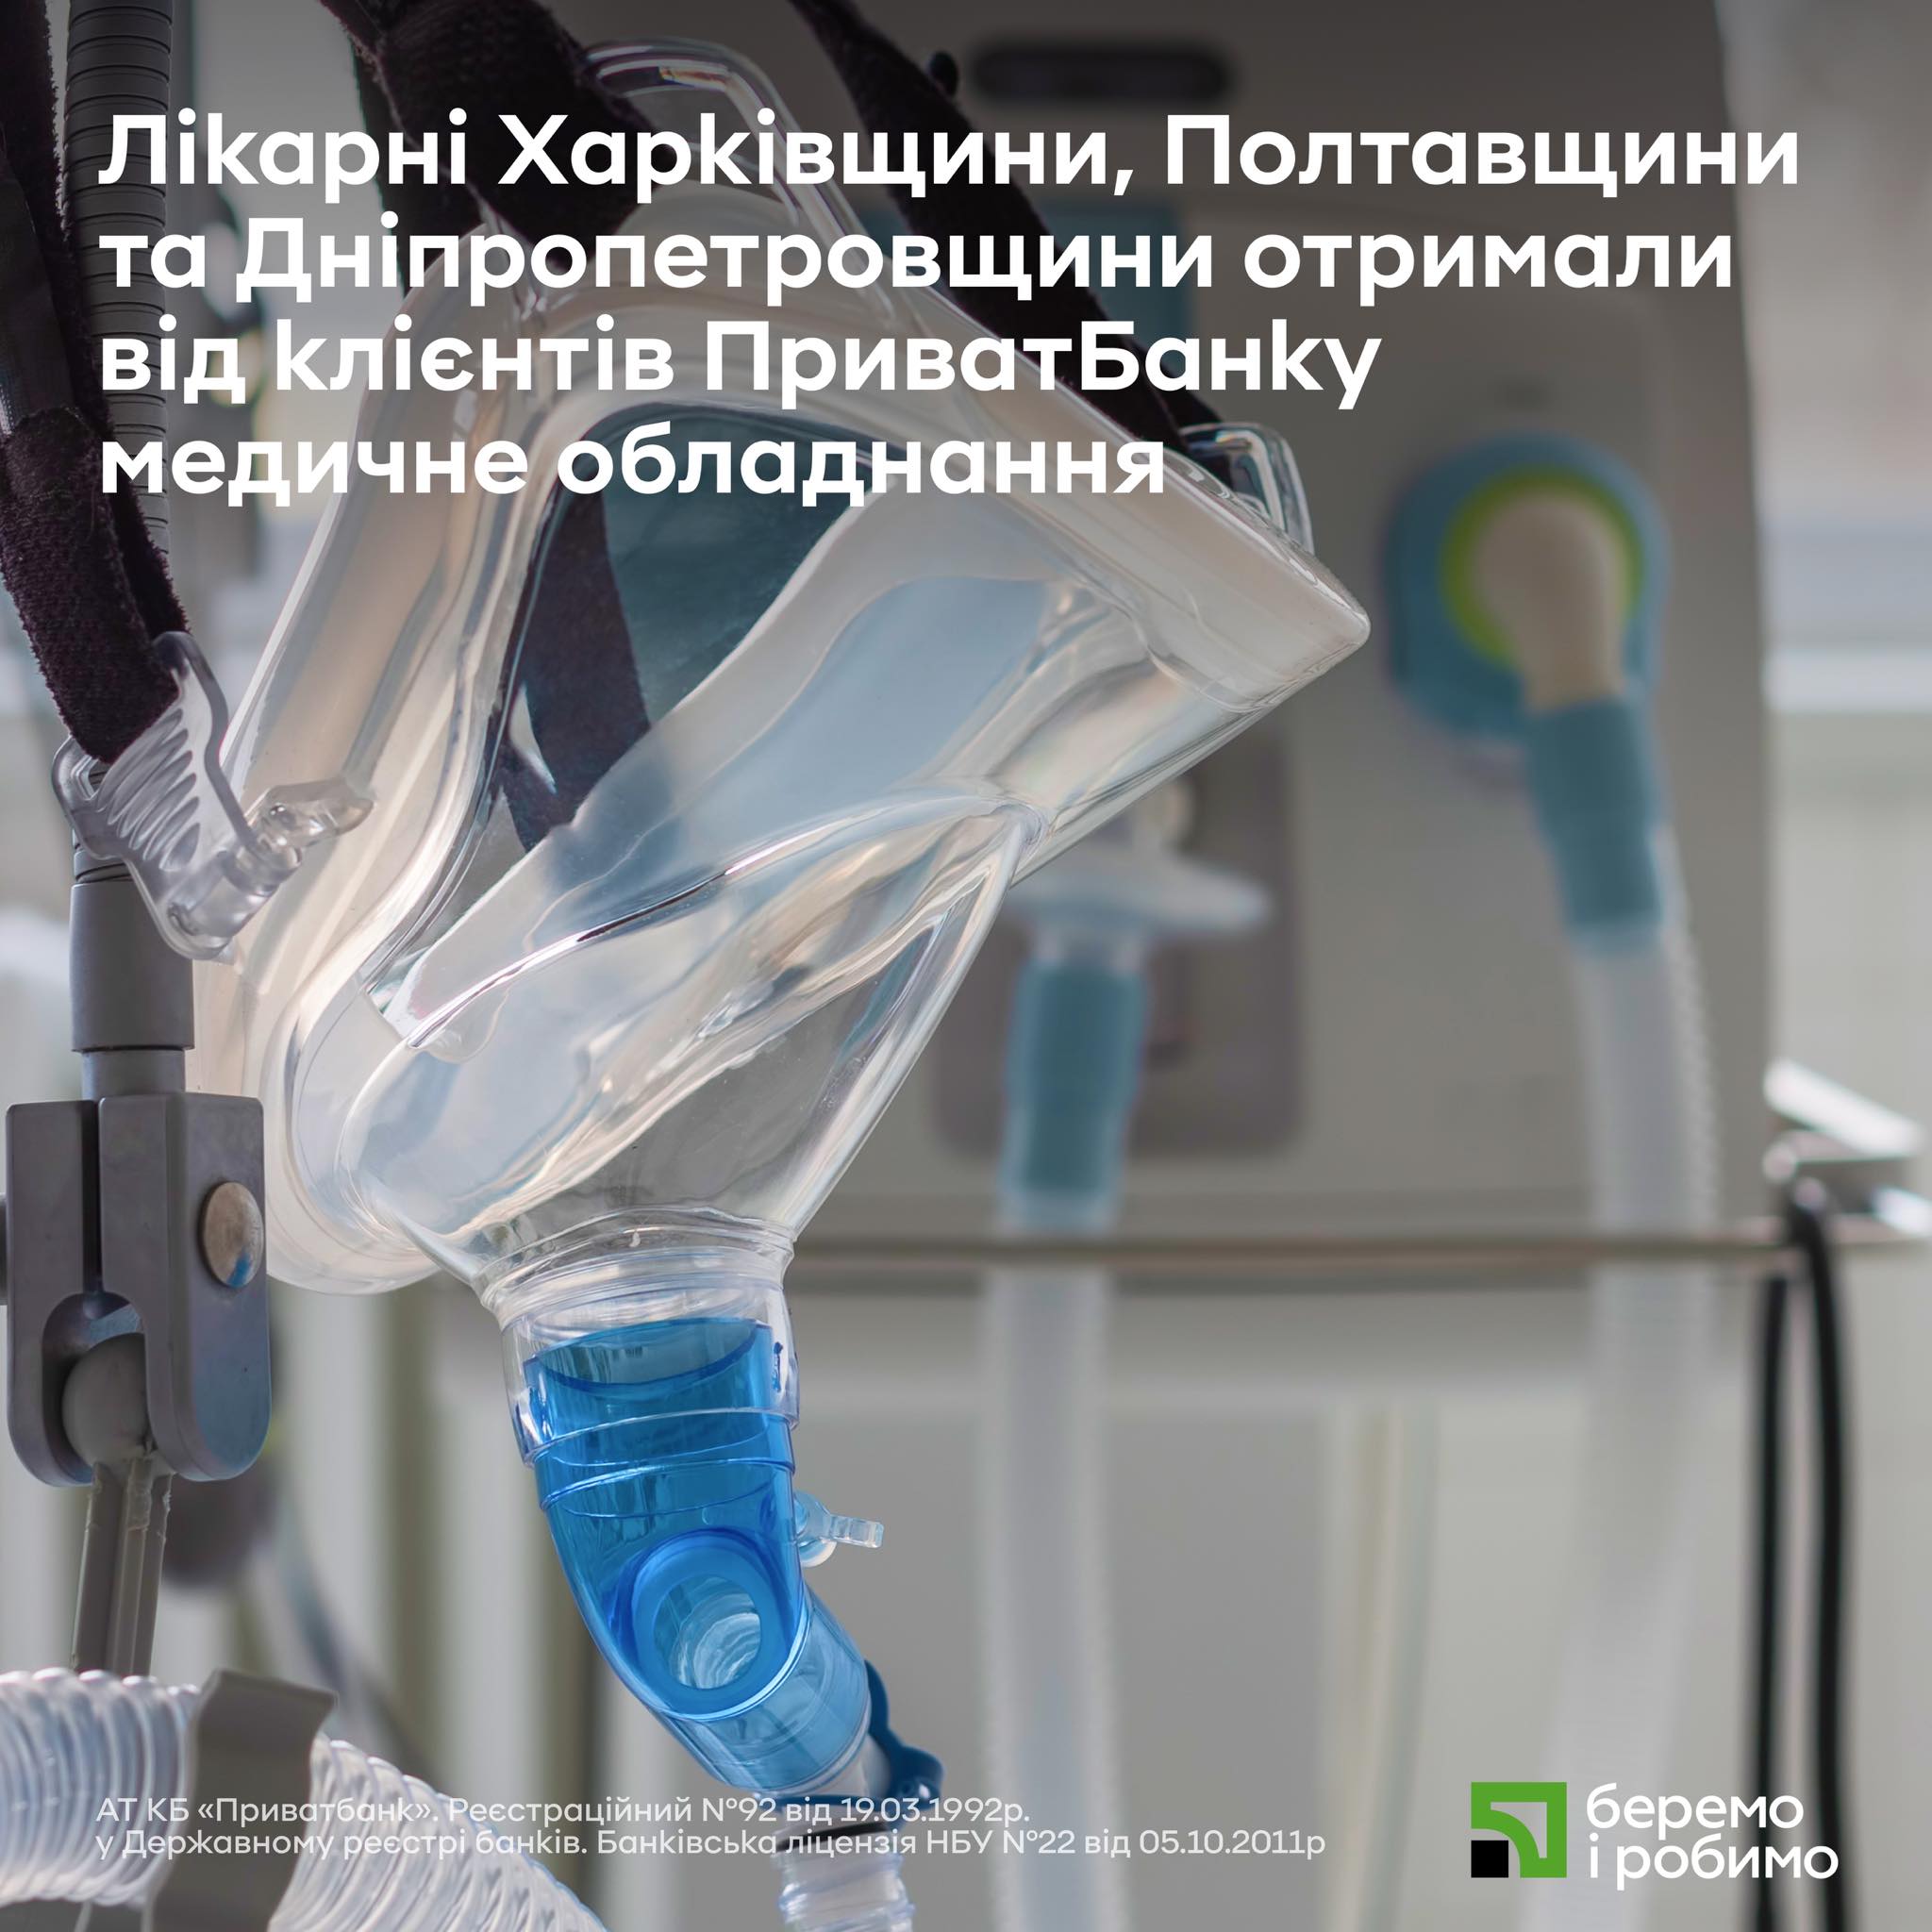 Four hospitals have received critically important oxygen equipment